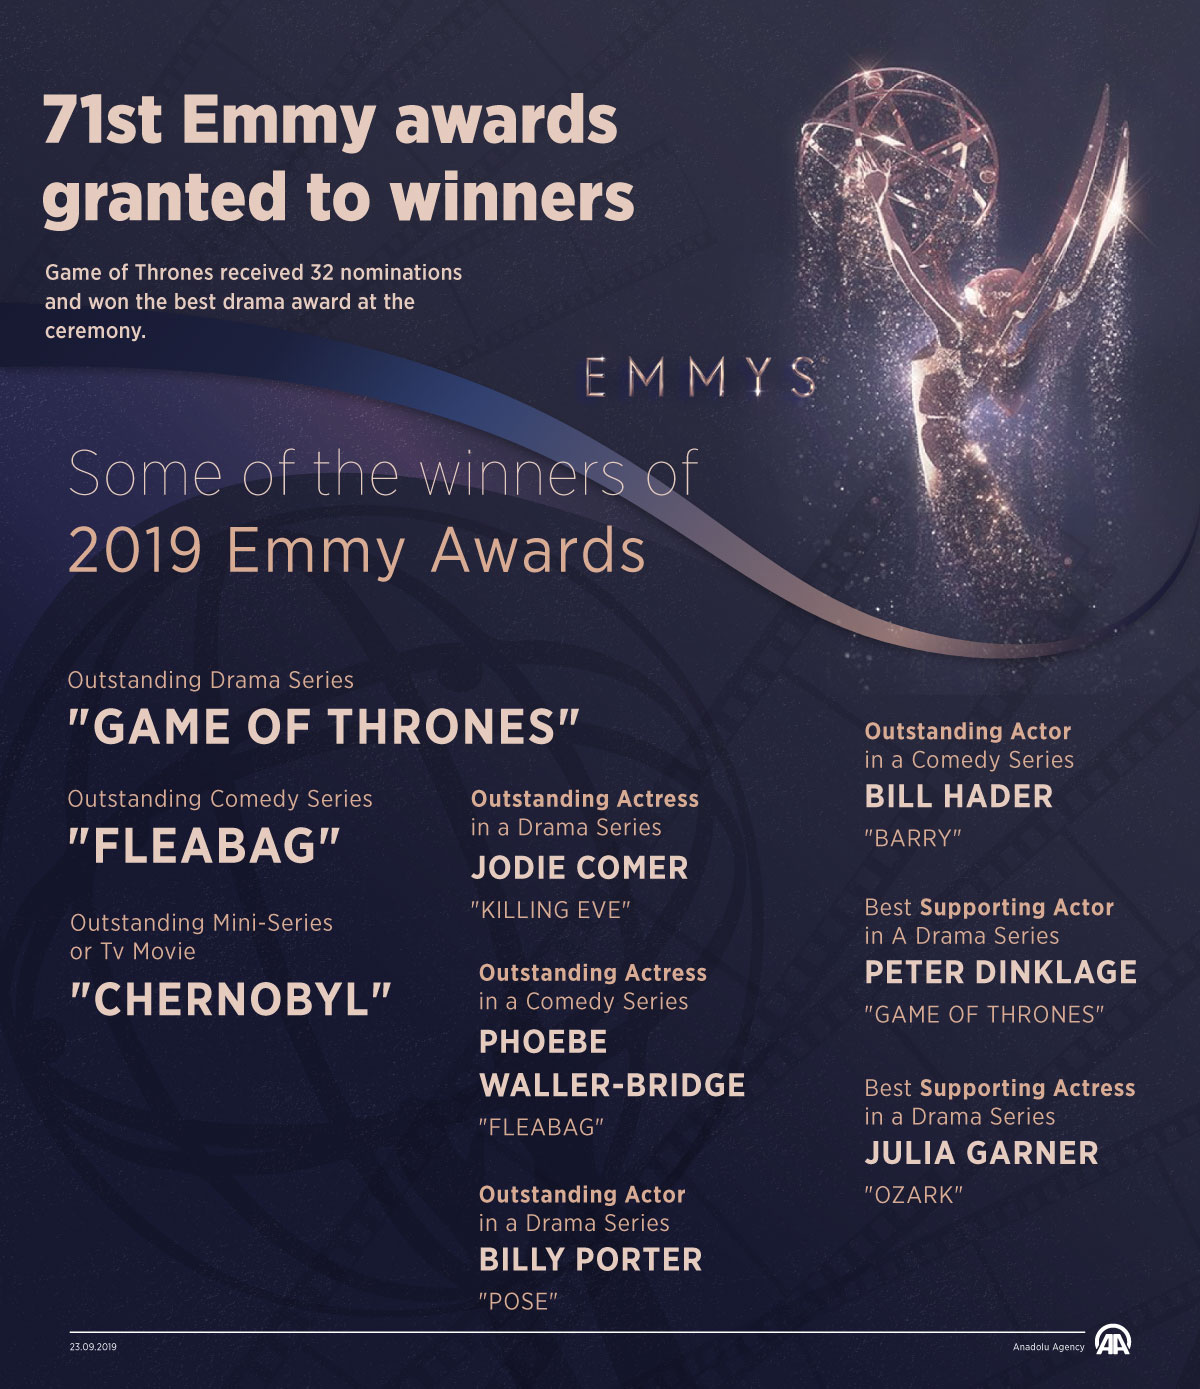 71st Emmy awards granted to winners